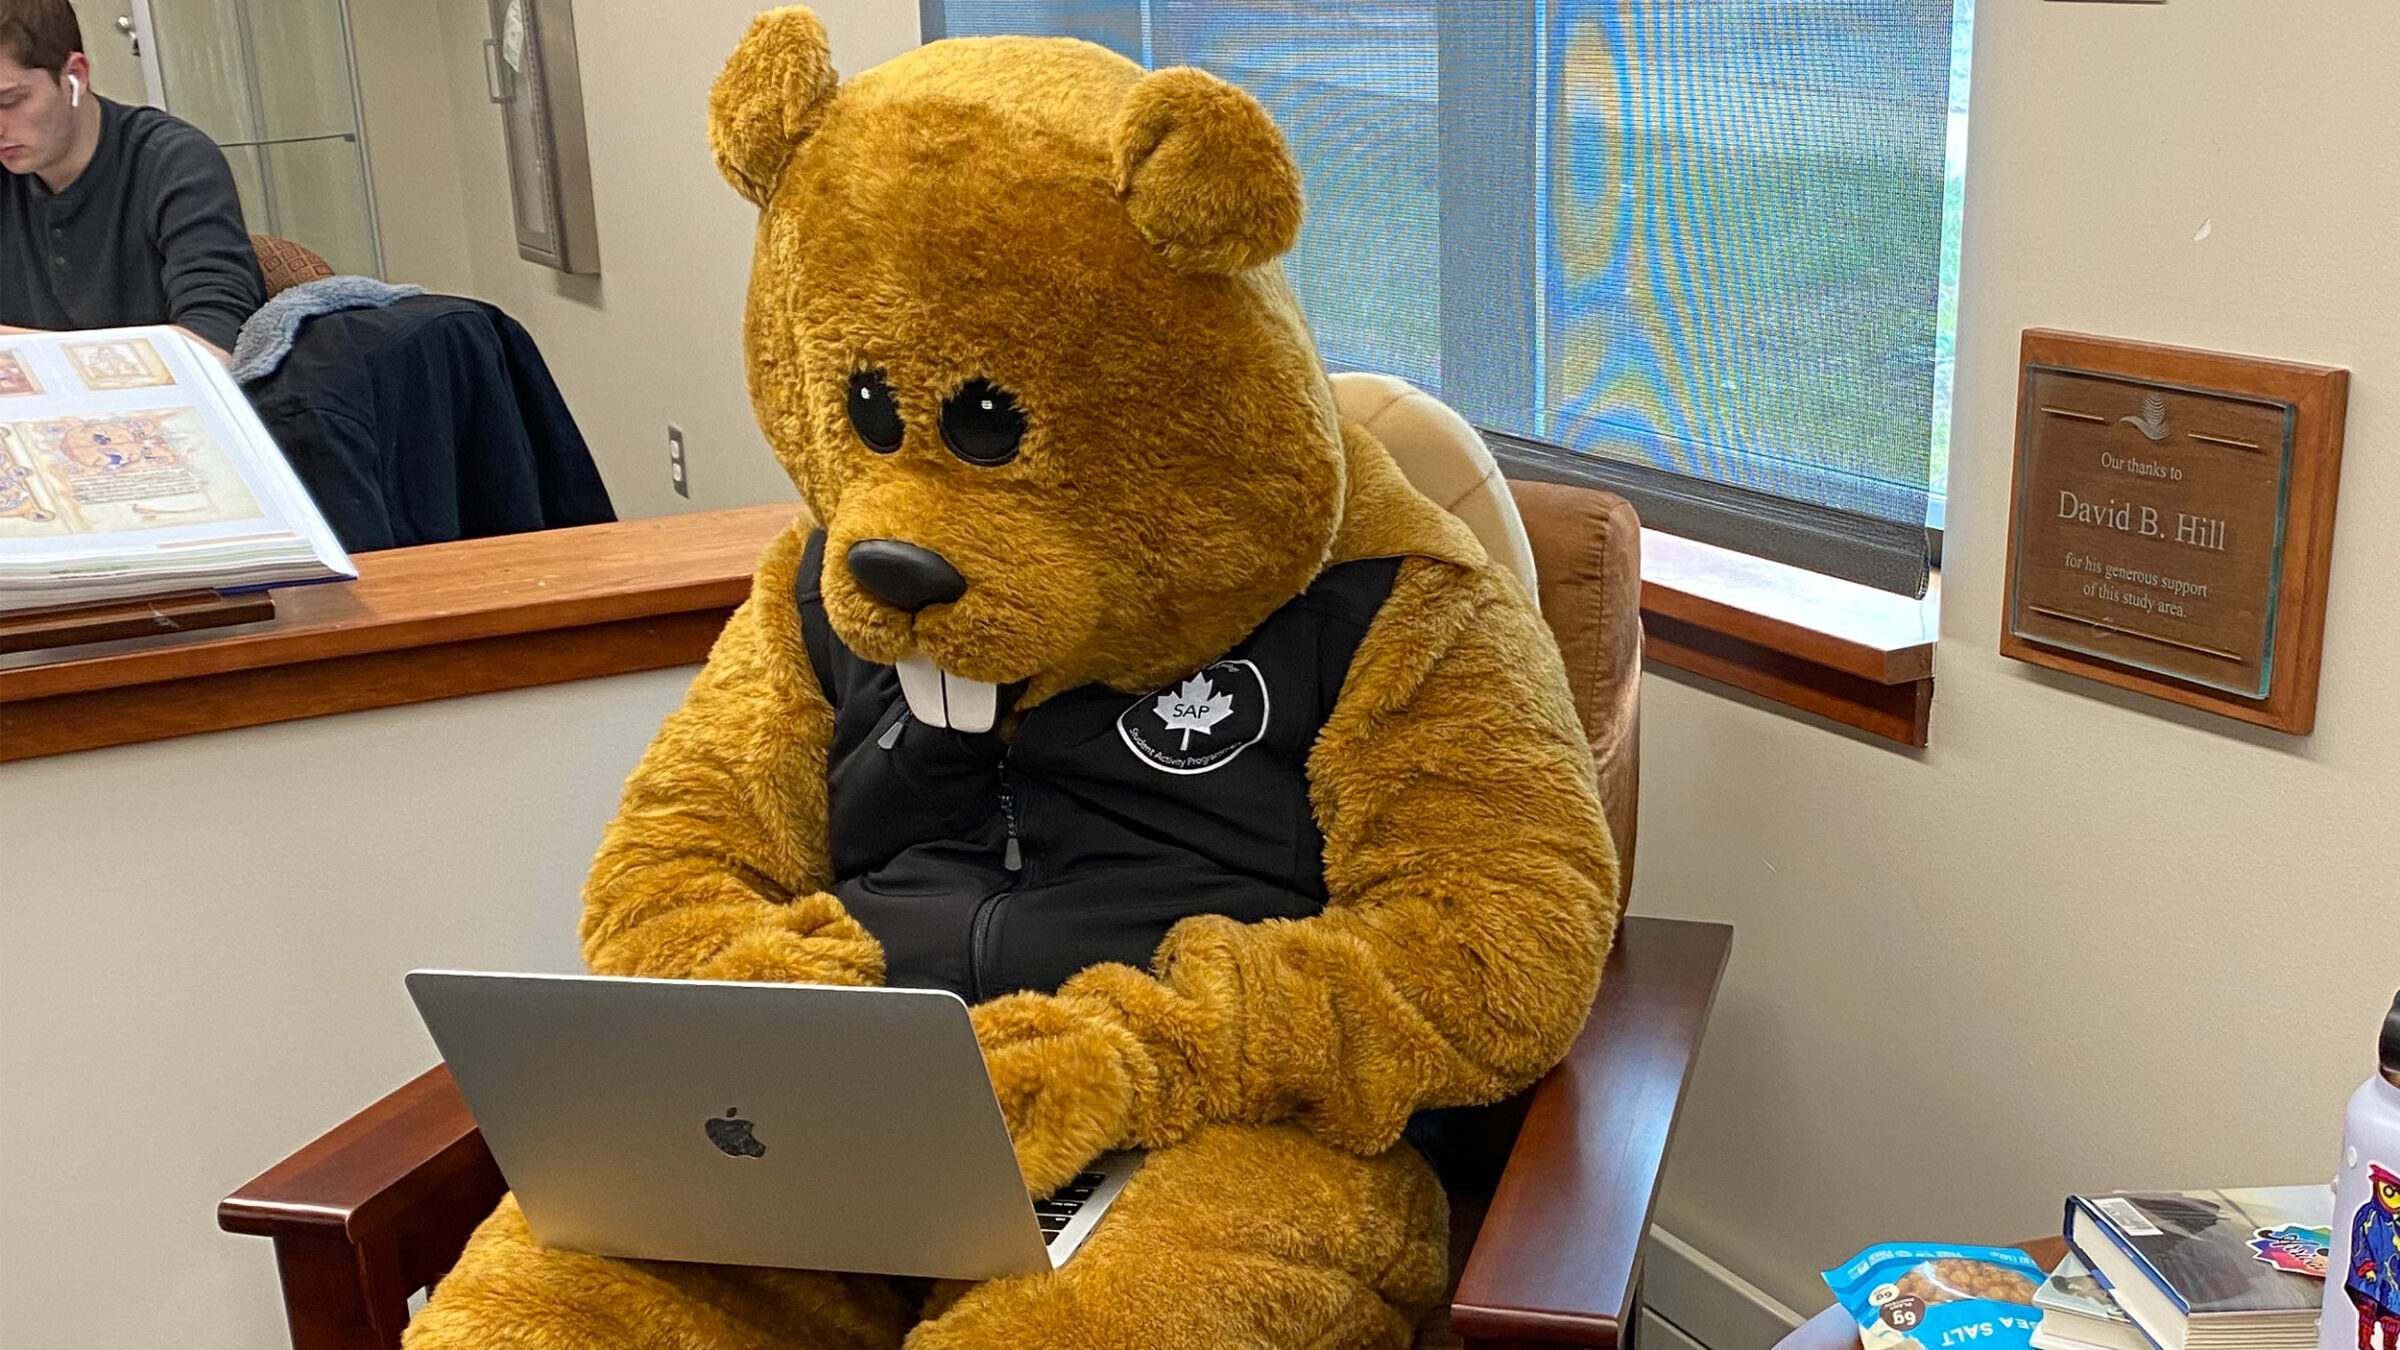 Chauncey the Beaver mascot sits in an armchair and types in a MacBook